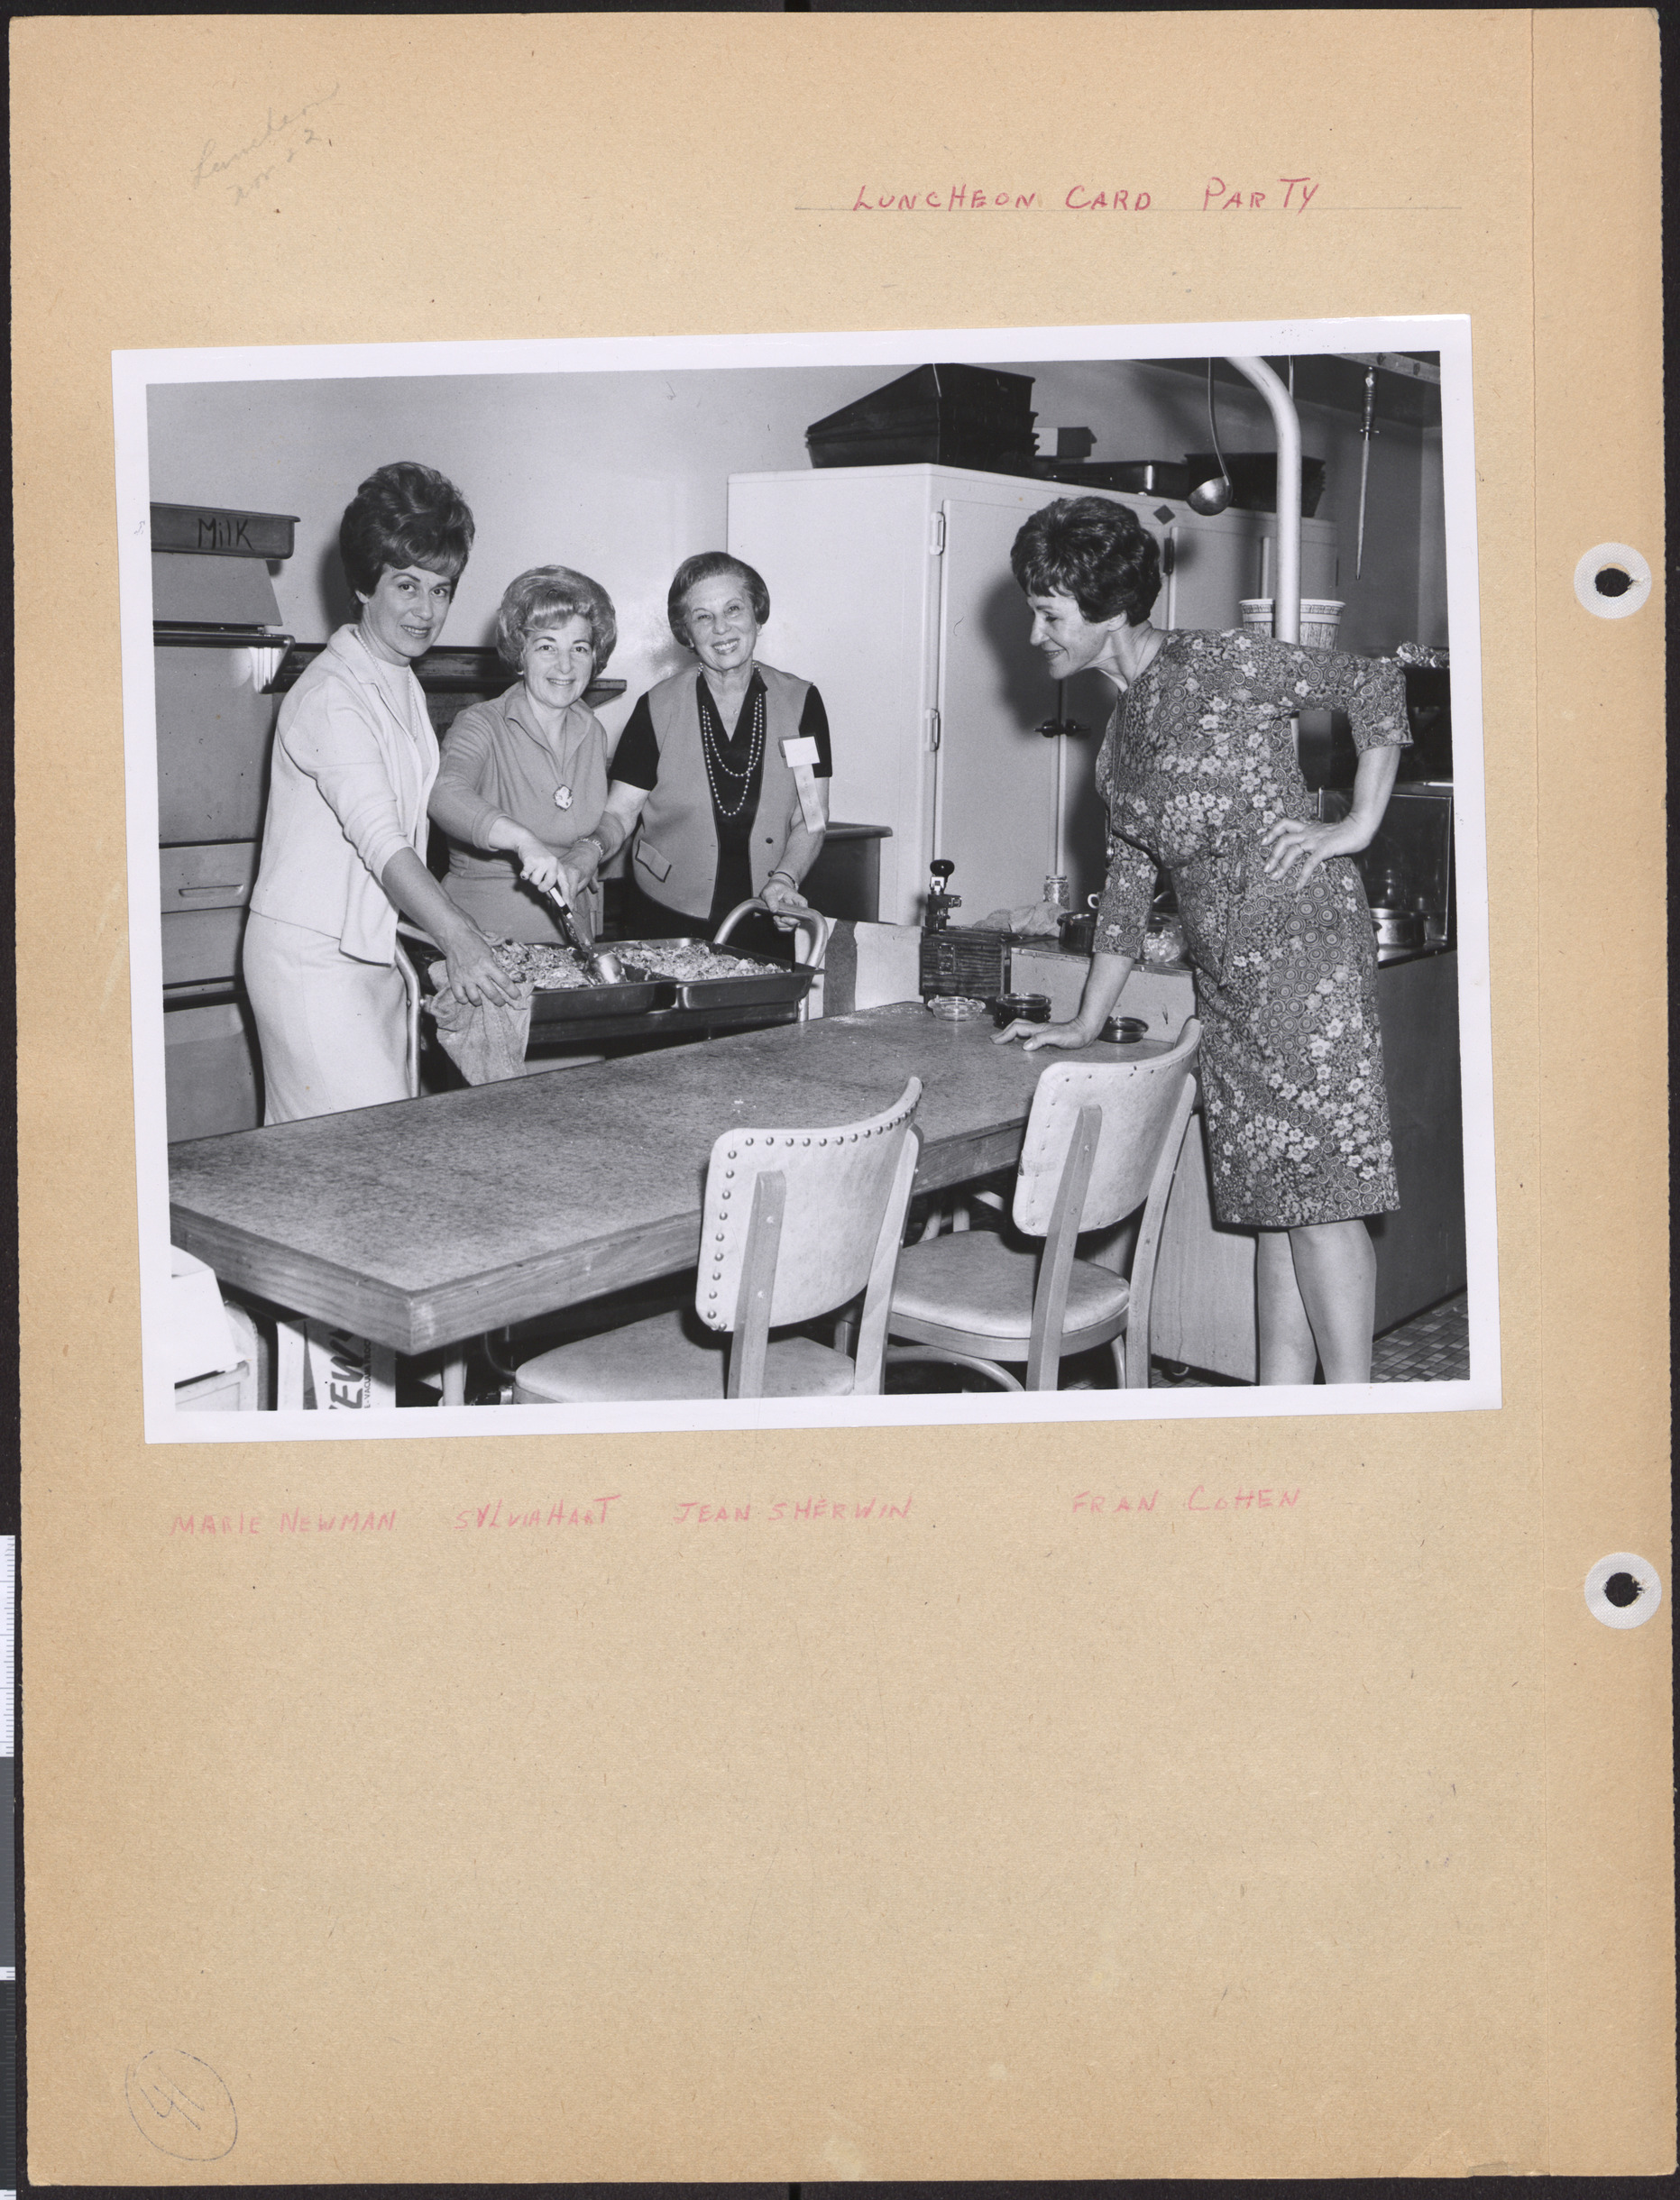 Photograph of Hadassah luncheon card party with Marie Newman, Sylvia Hart, Jean Sherwin and Fran Cohen